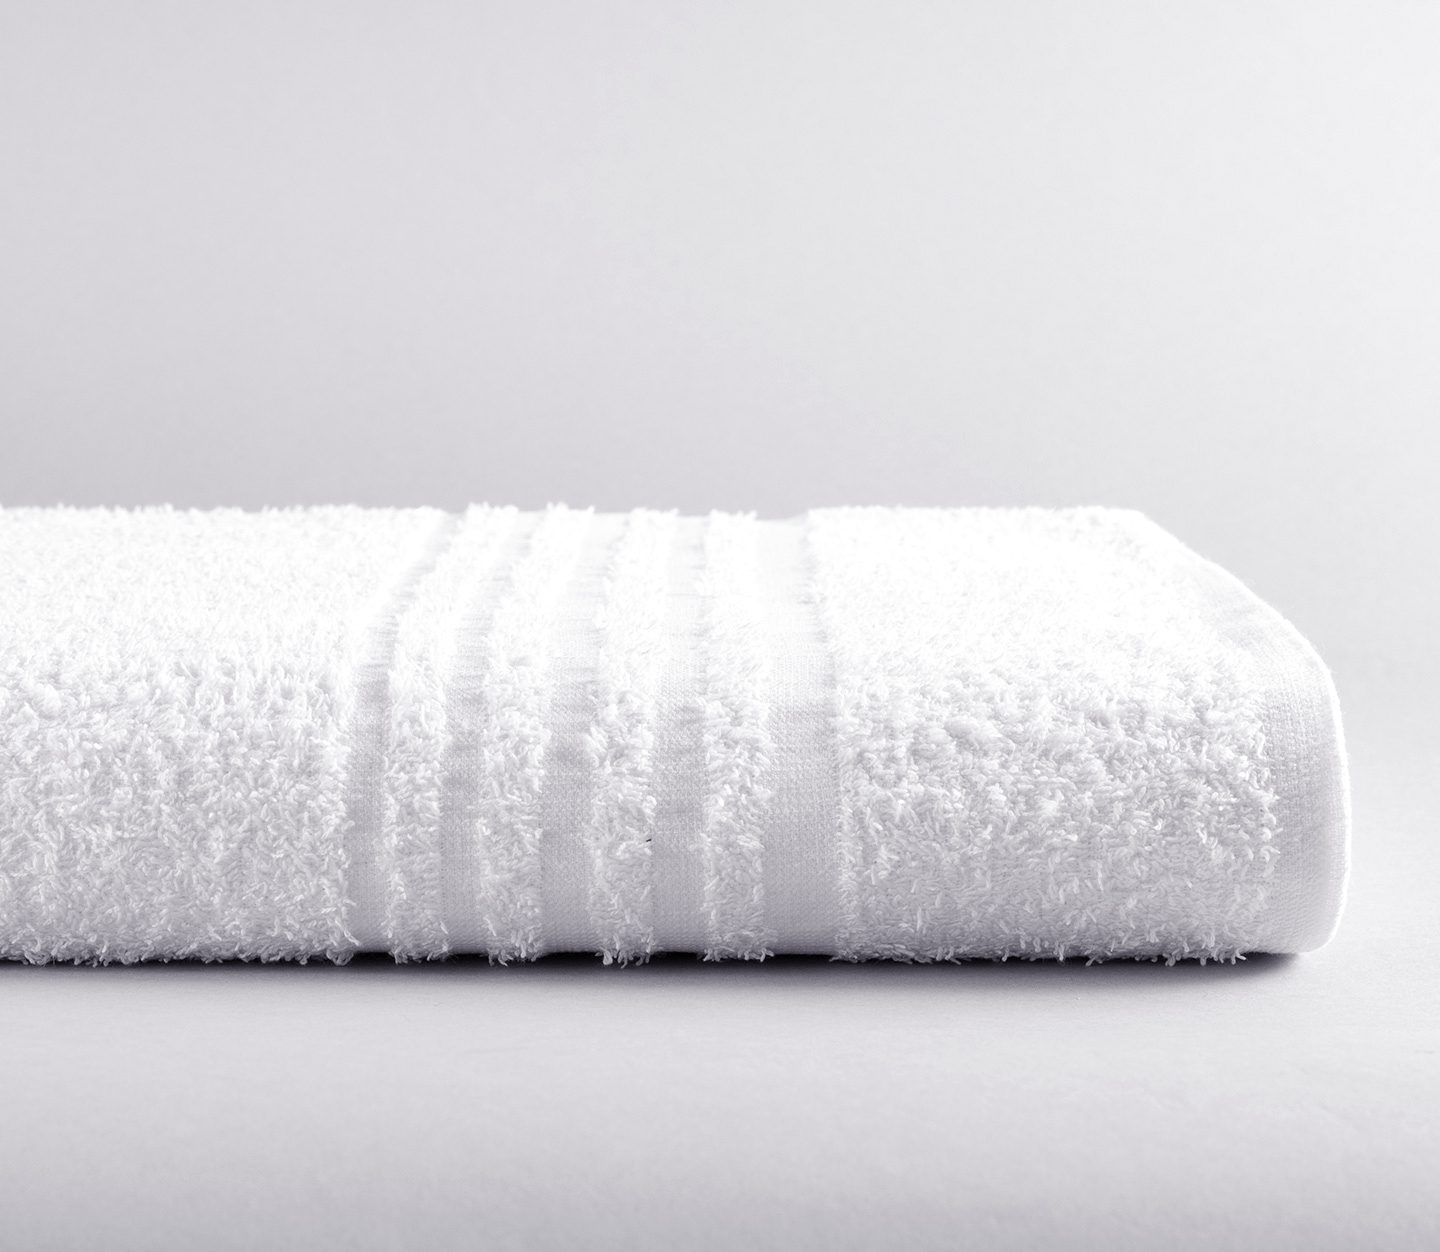 White Surgical Towels